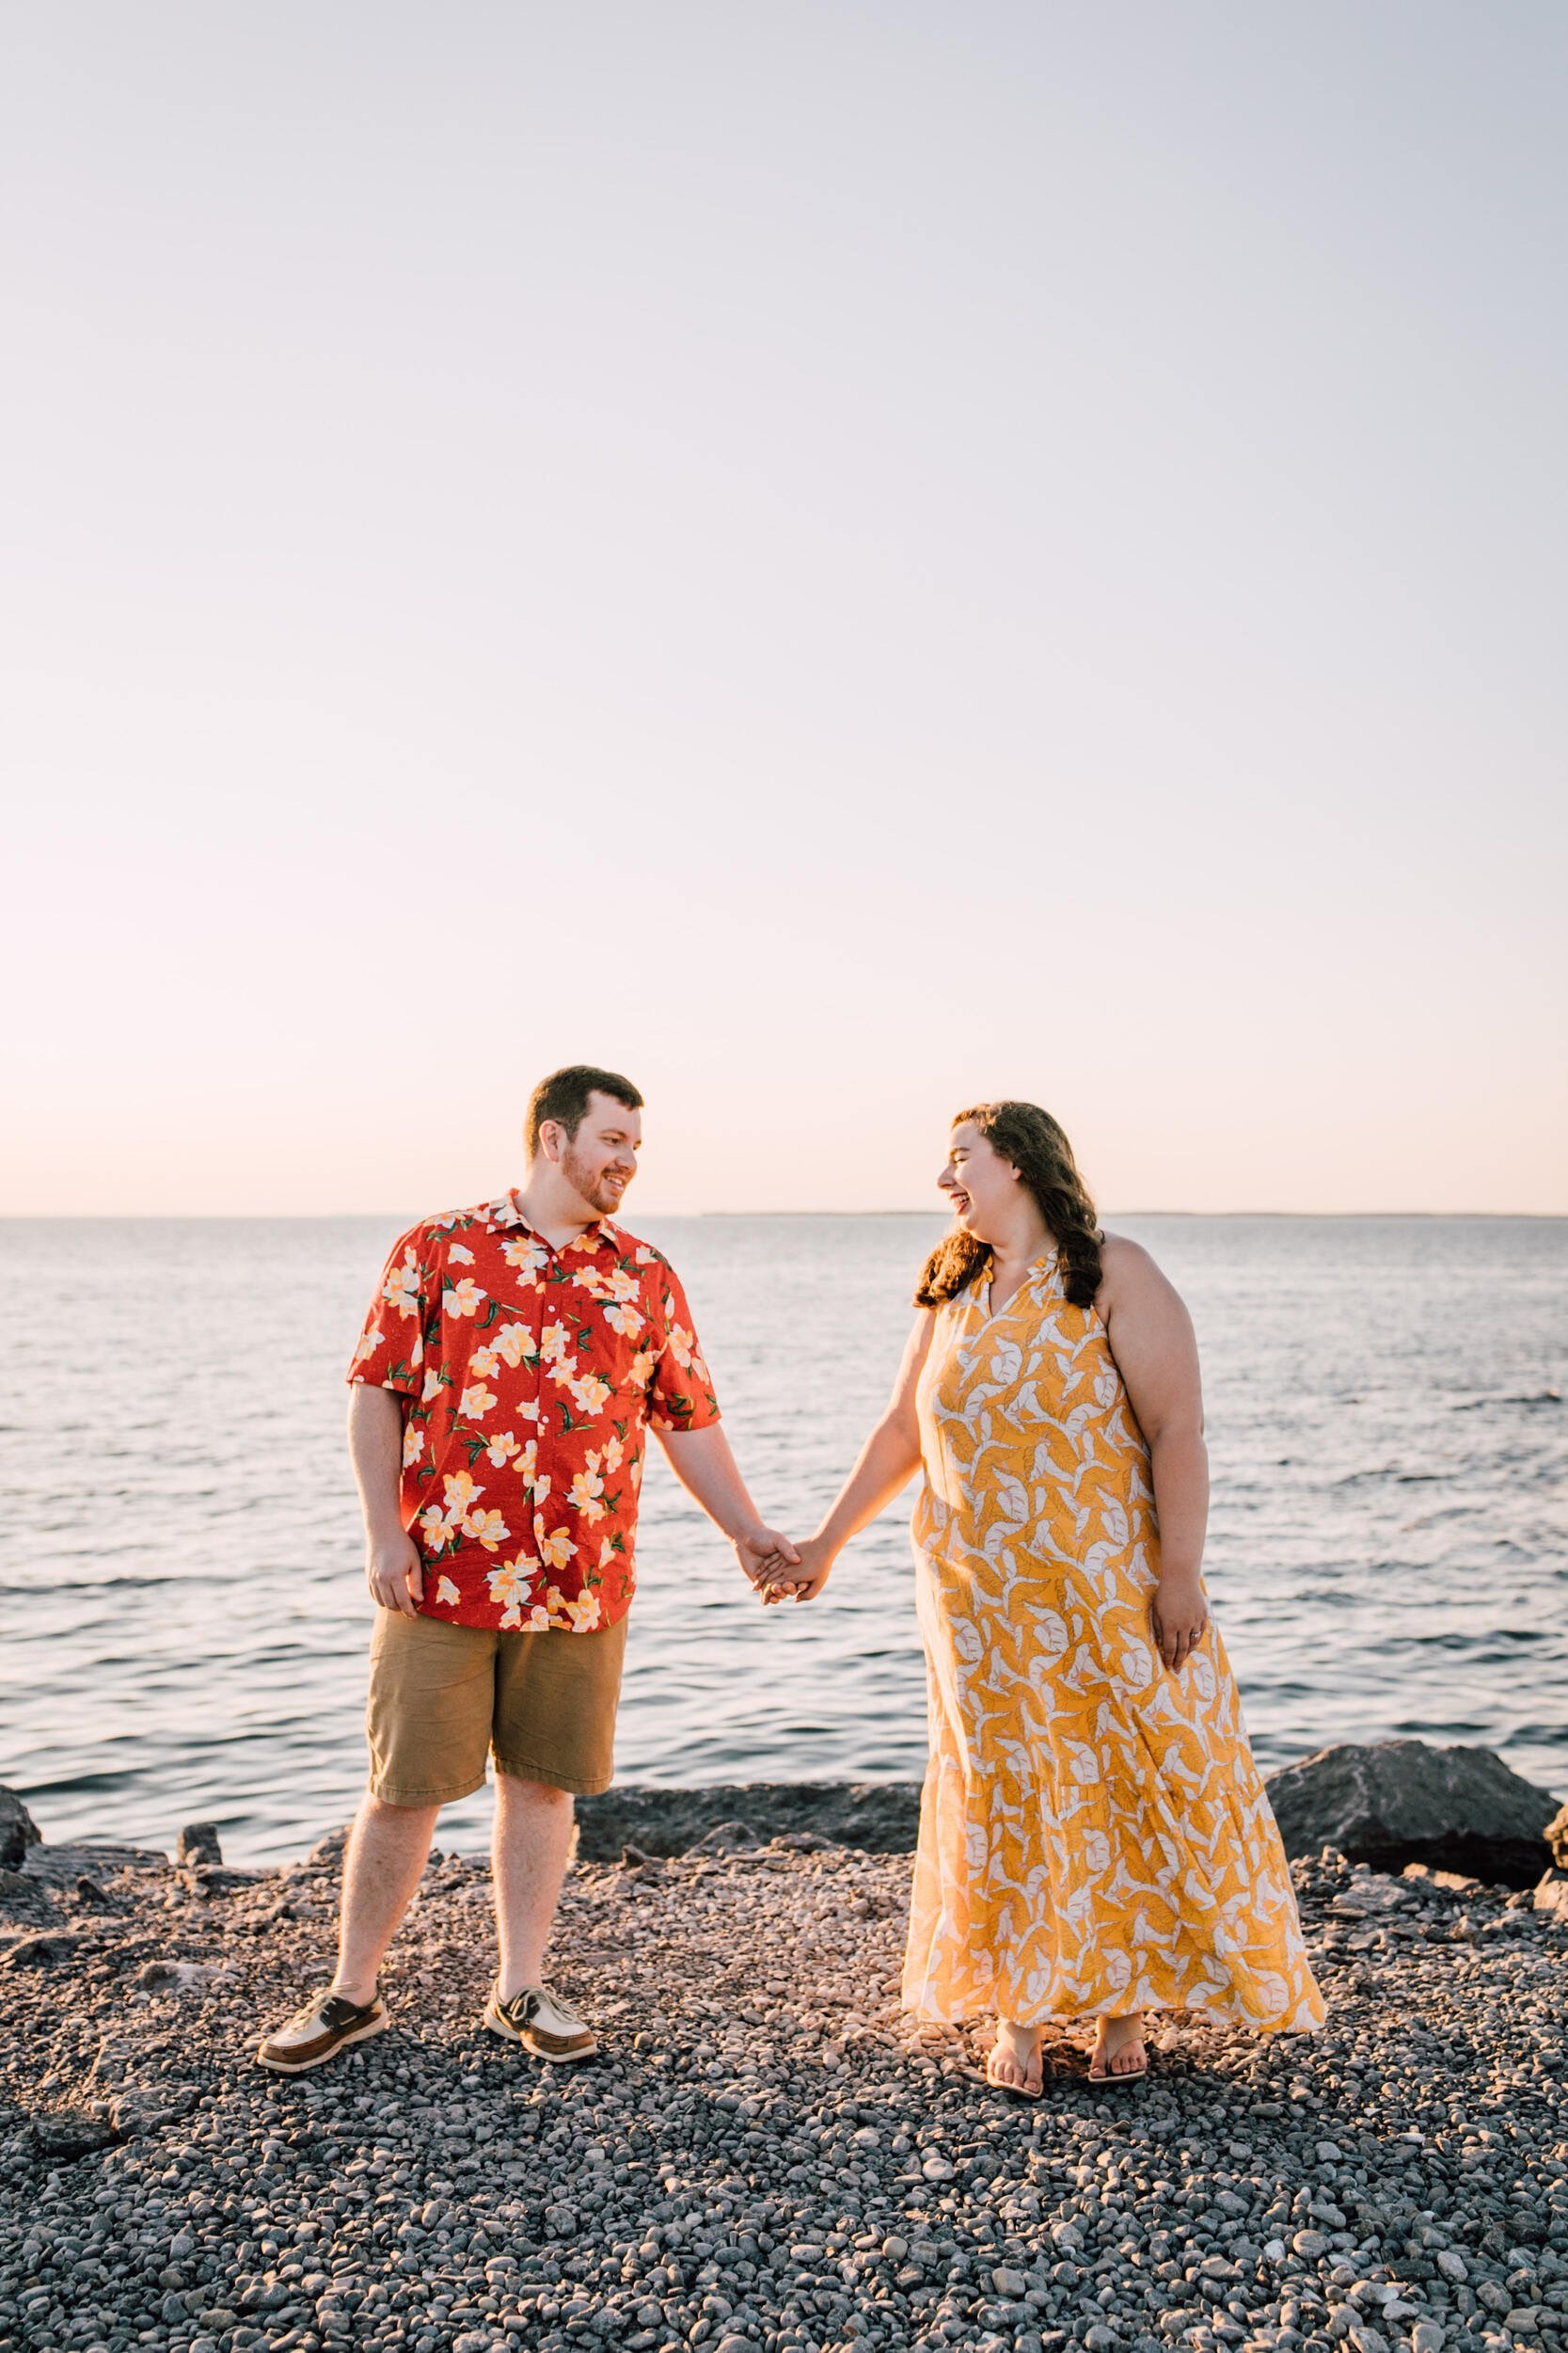  Lakefront photography is at its peak for Brandon and Hanna’s engagement session. Here, they hold hands while smiling at each other on a rocky beach in front of Lake Ontario 